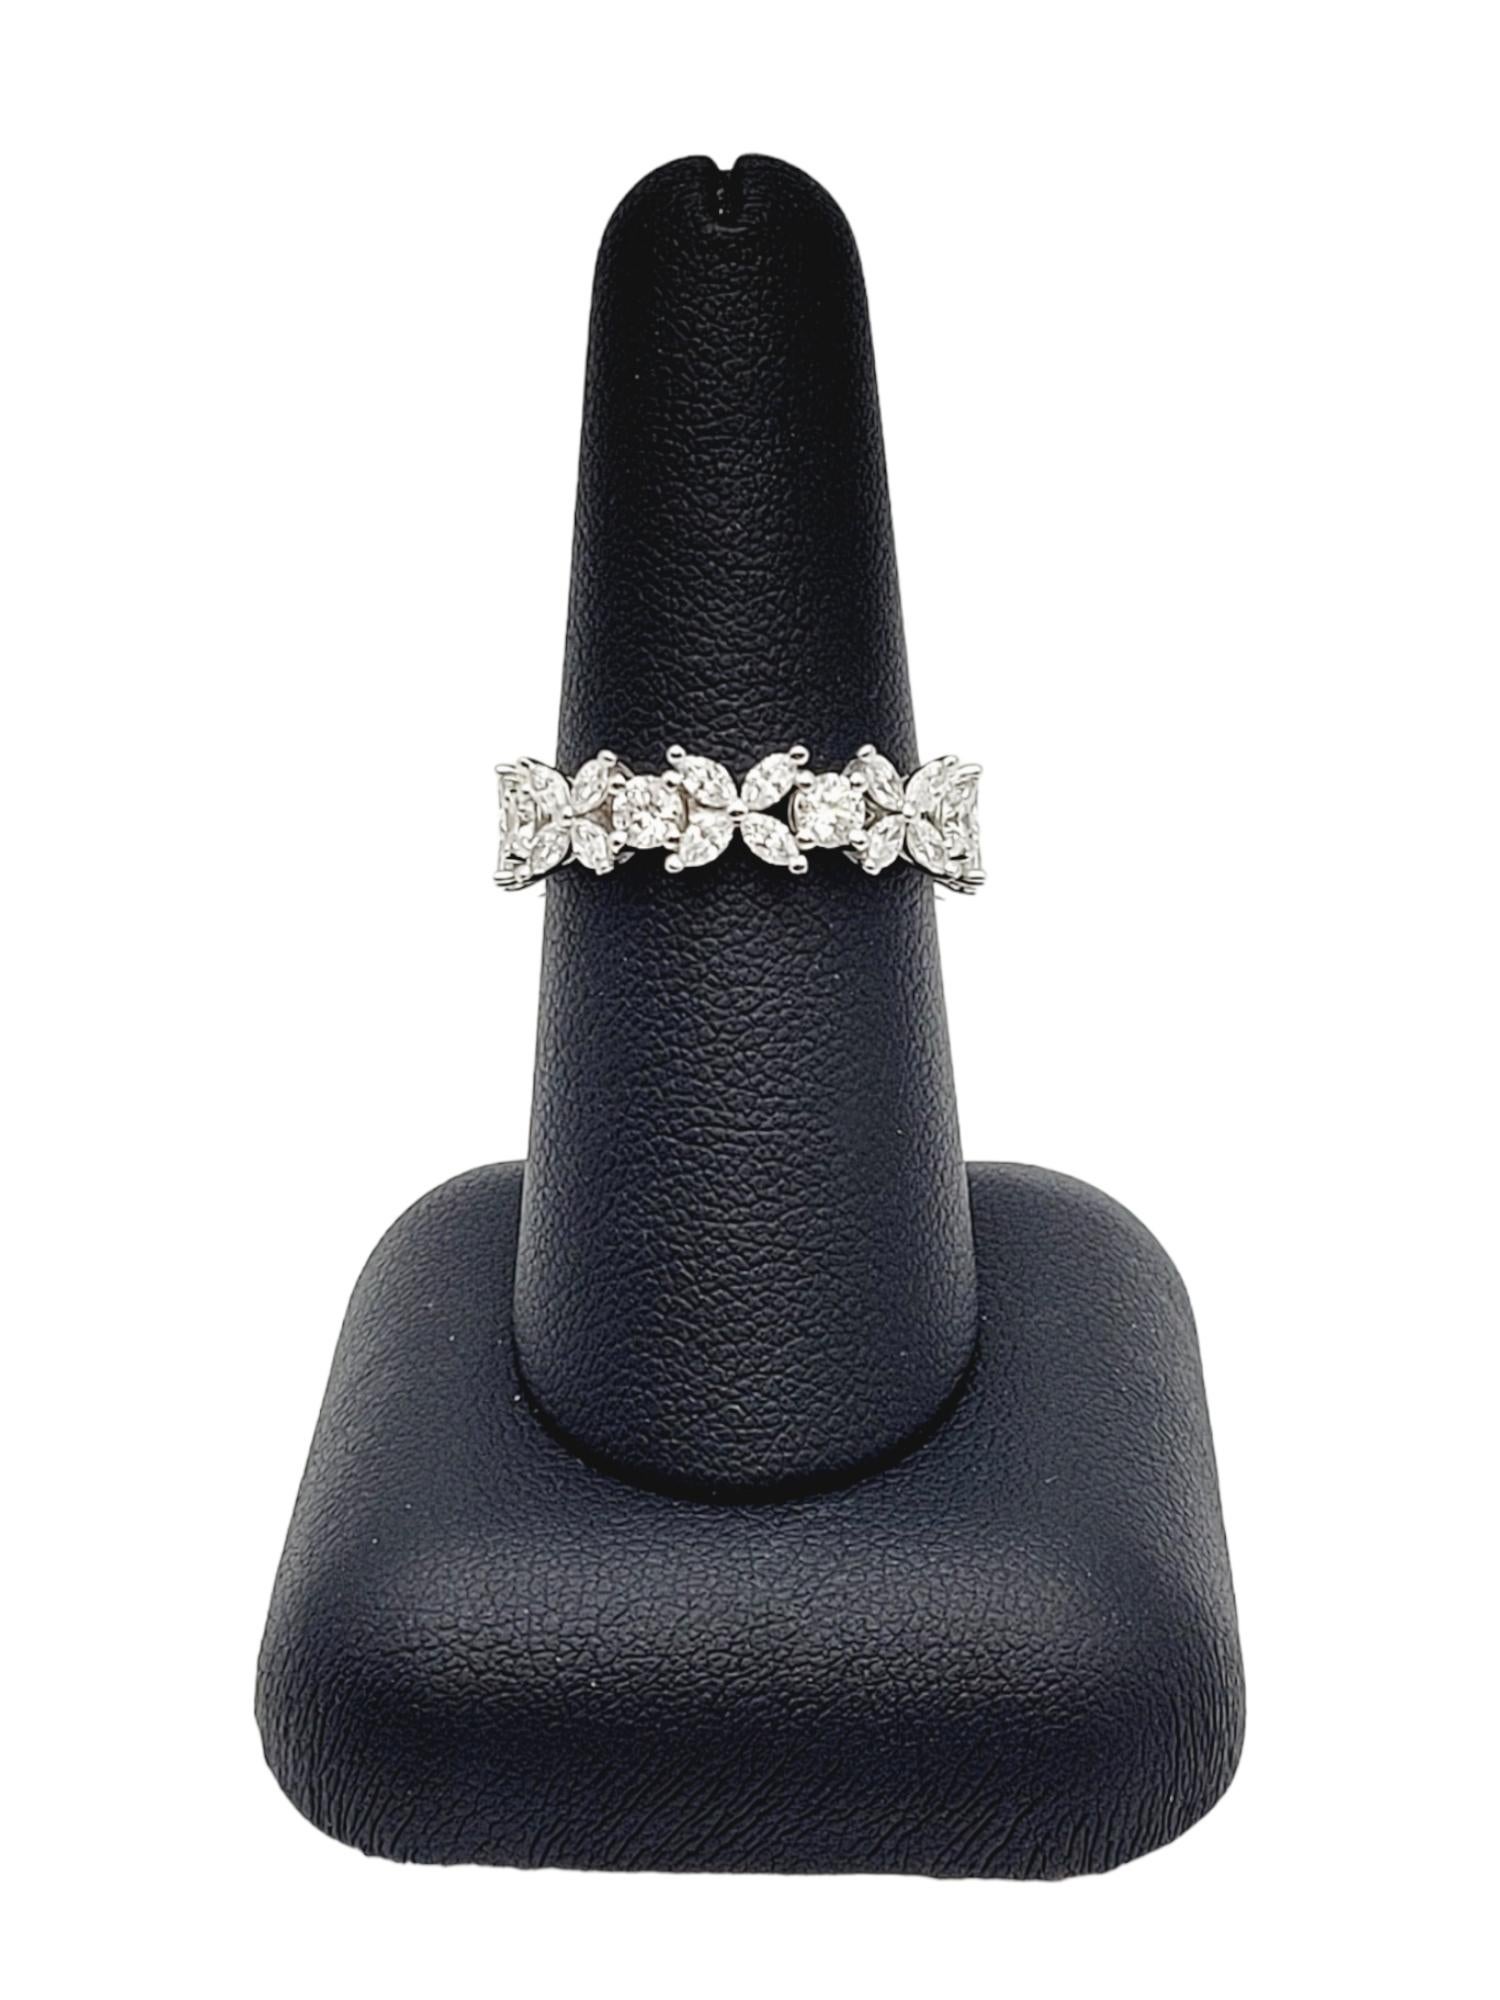 Tiffany & Co. Victoria Alternating 2.27 Carats Diamond Ring in Platinum In Excellent Condition For Sale In Scottsdale, AZ